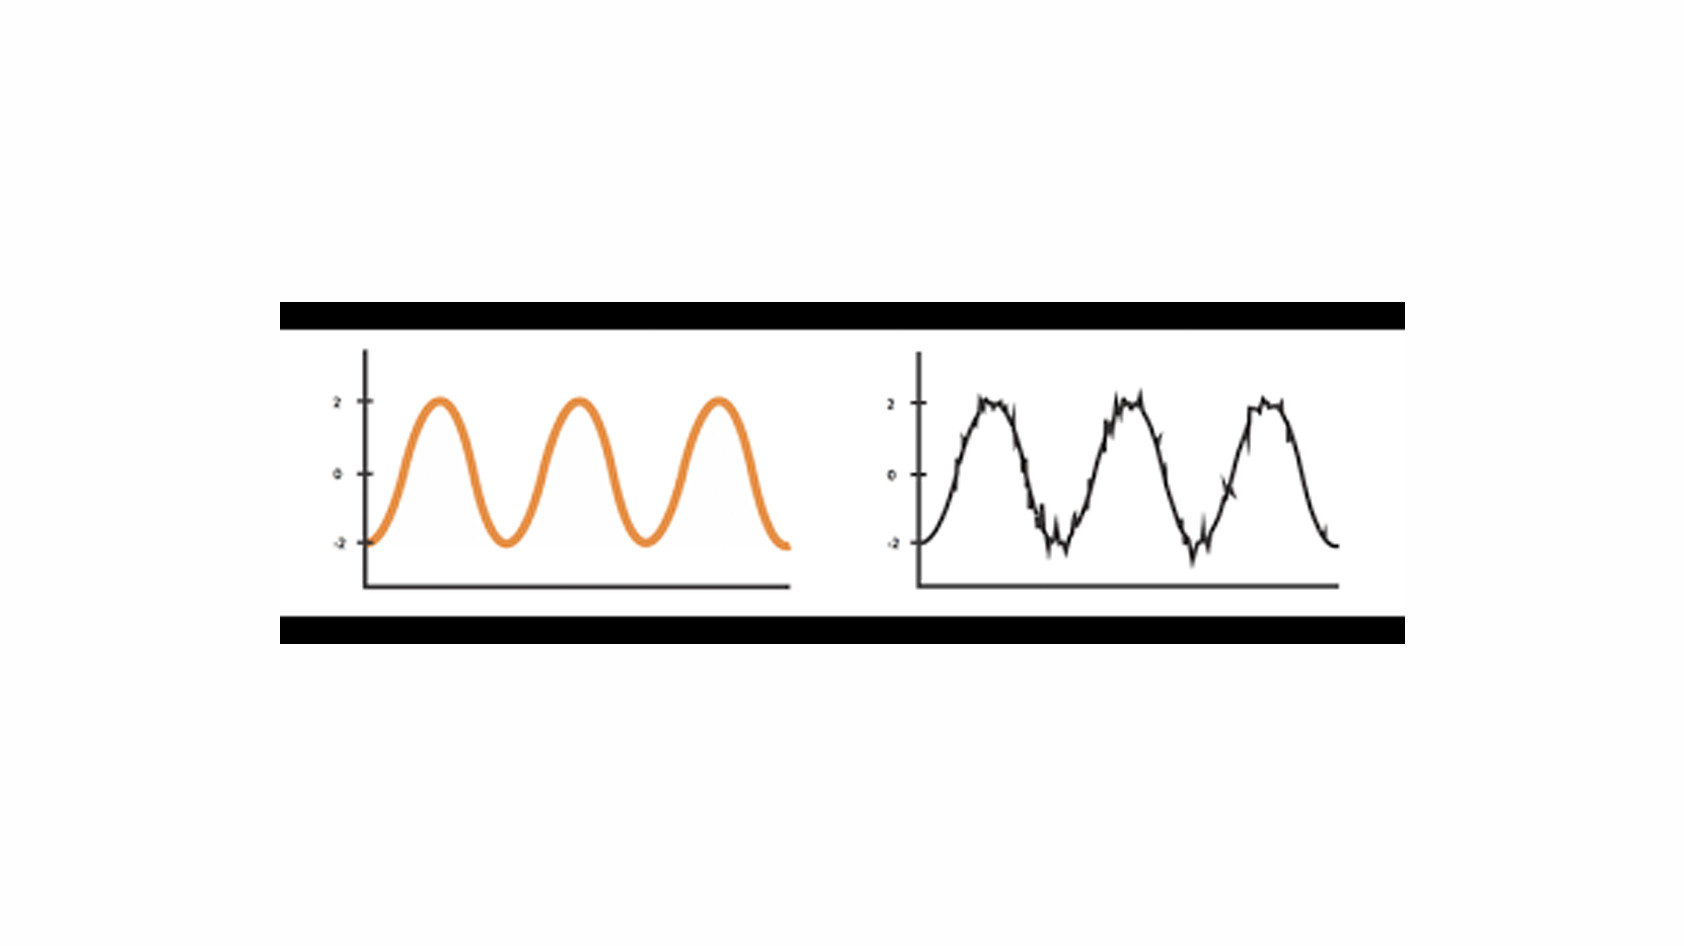 A chart showing a distorted audio signal